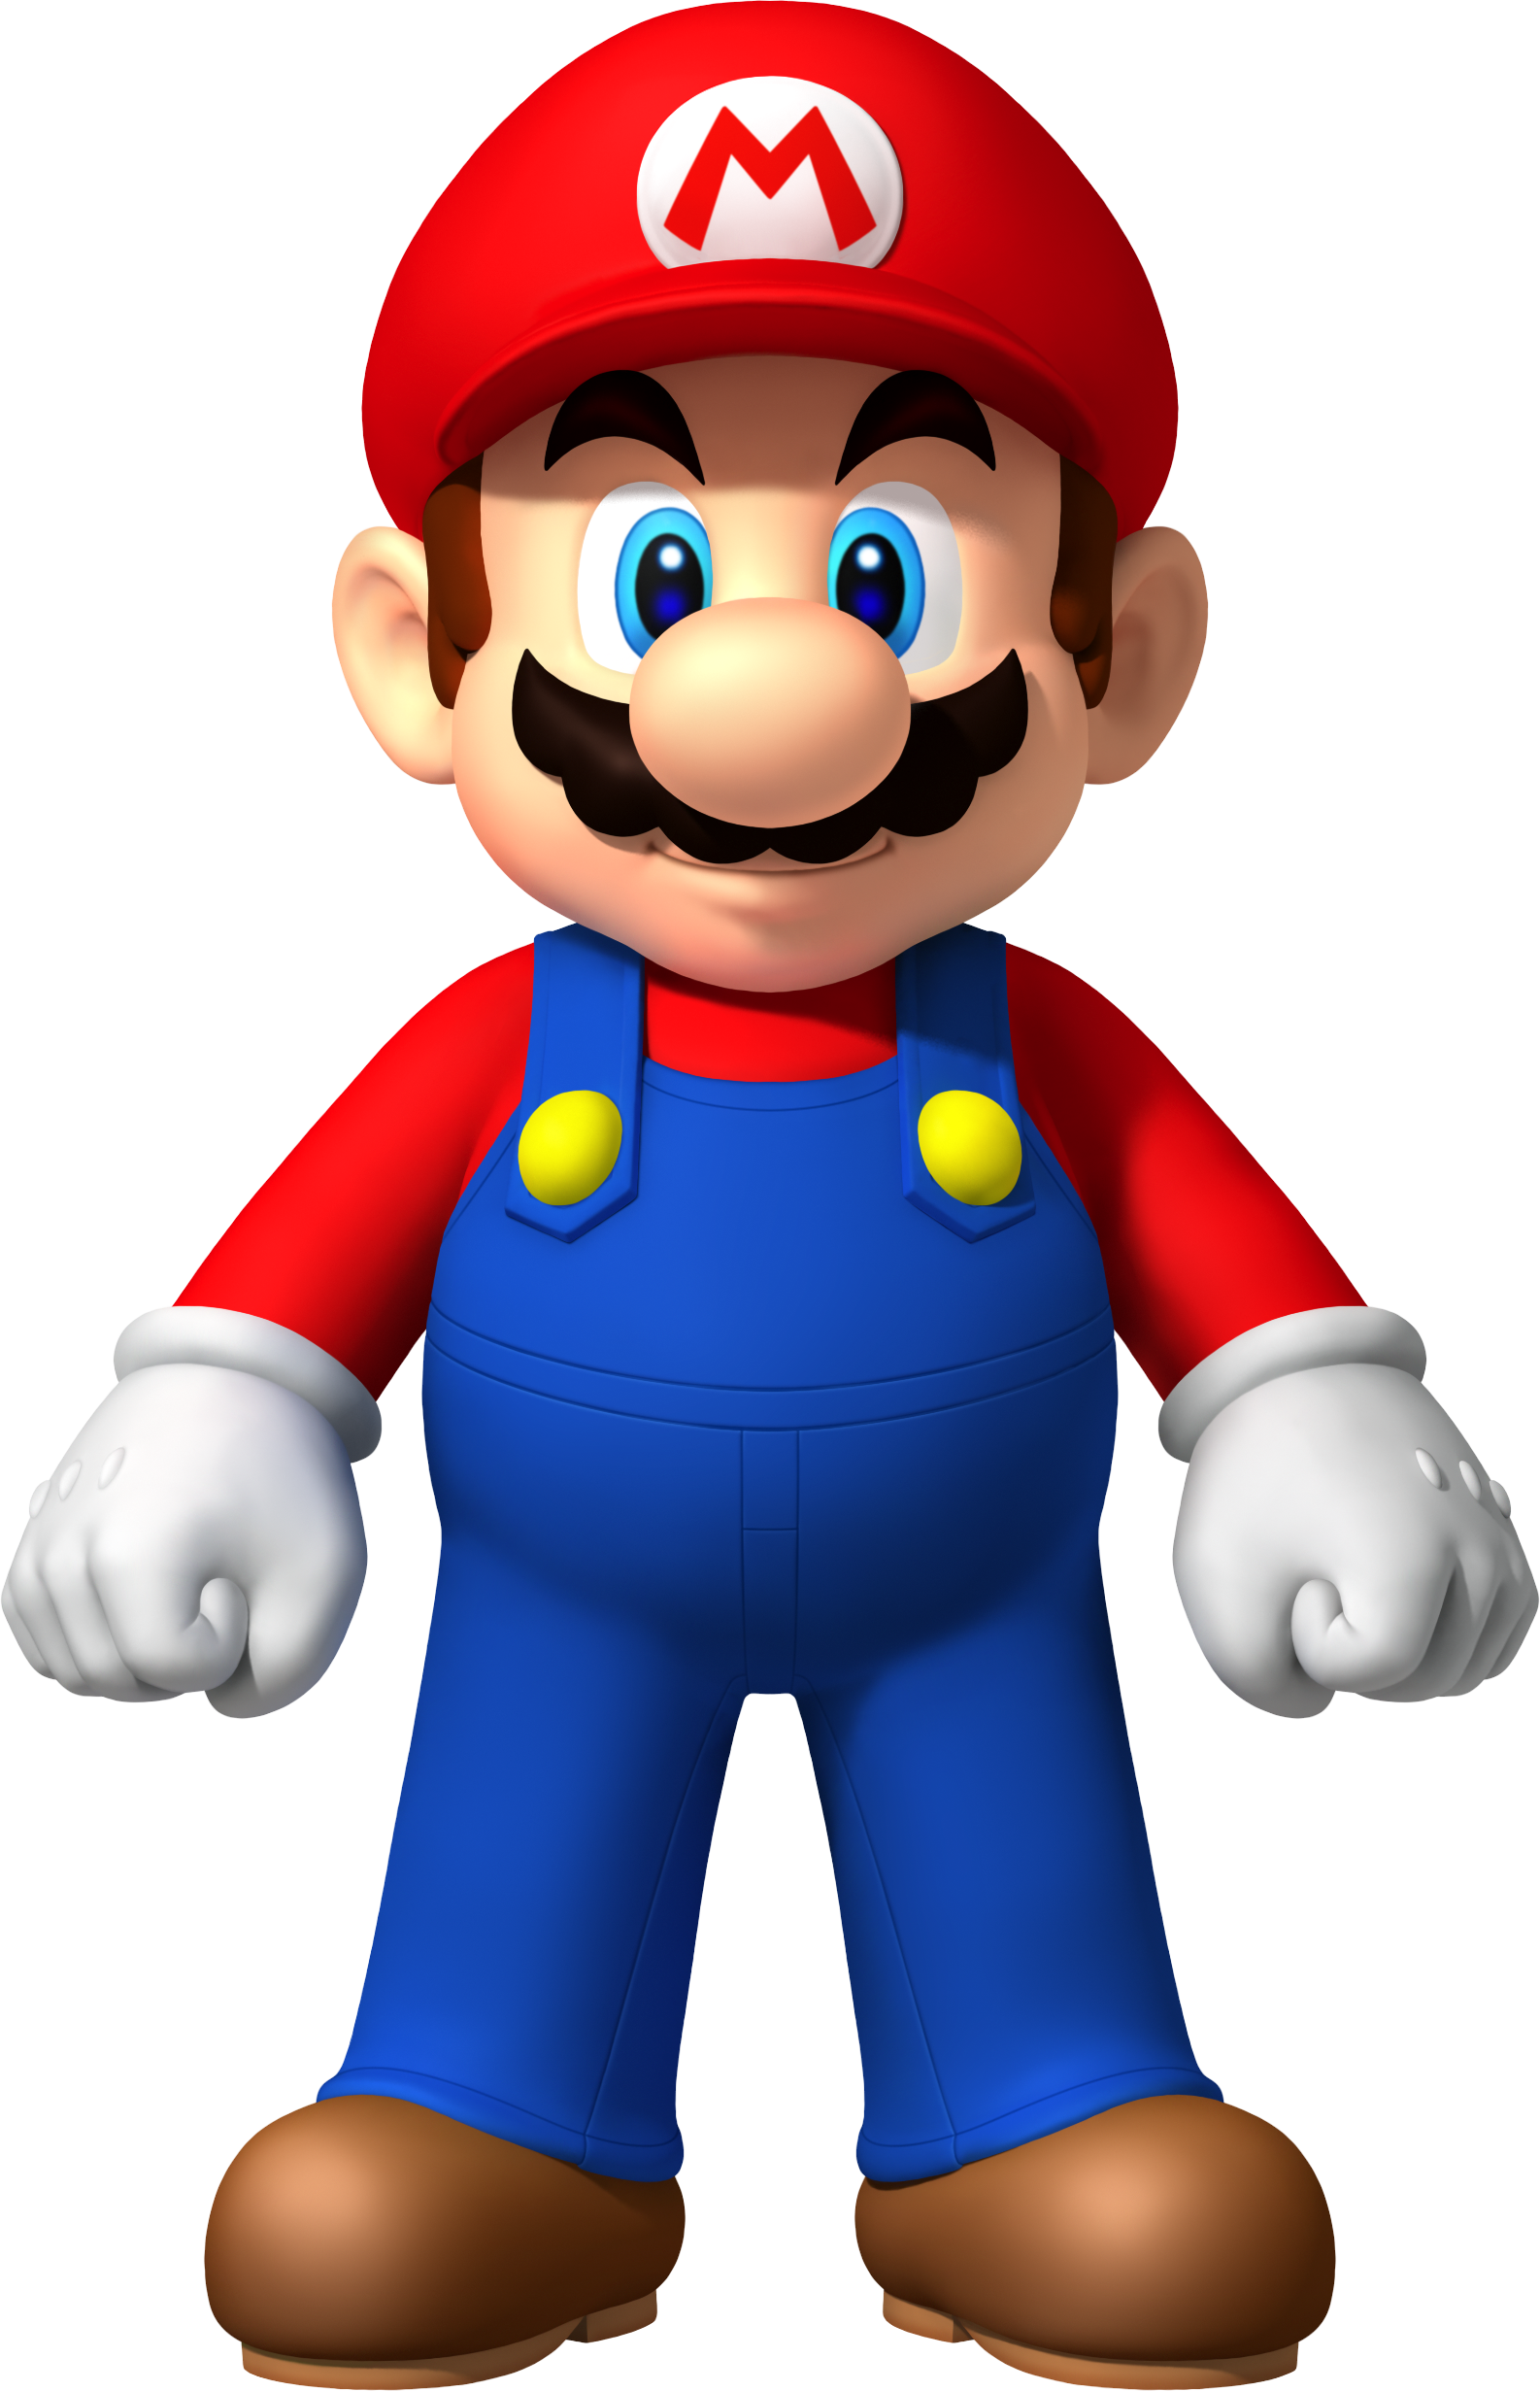 1000+ images about Mario bros